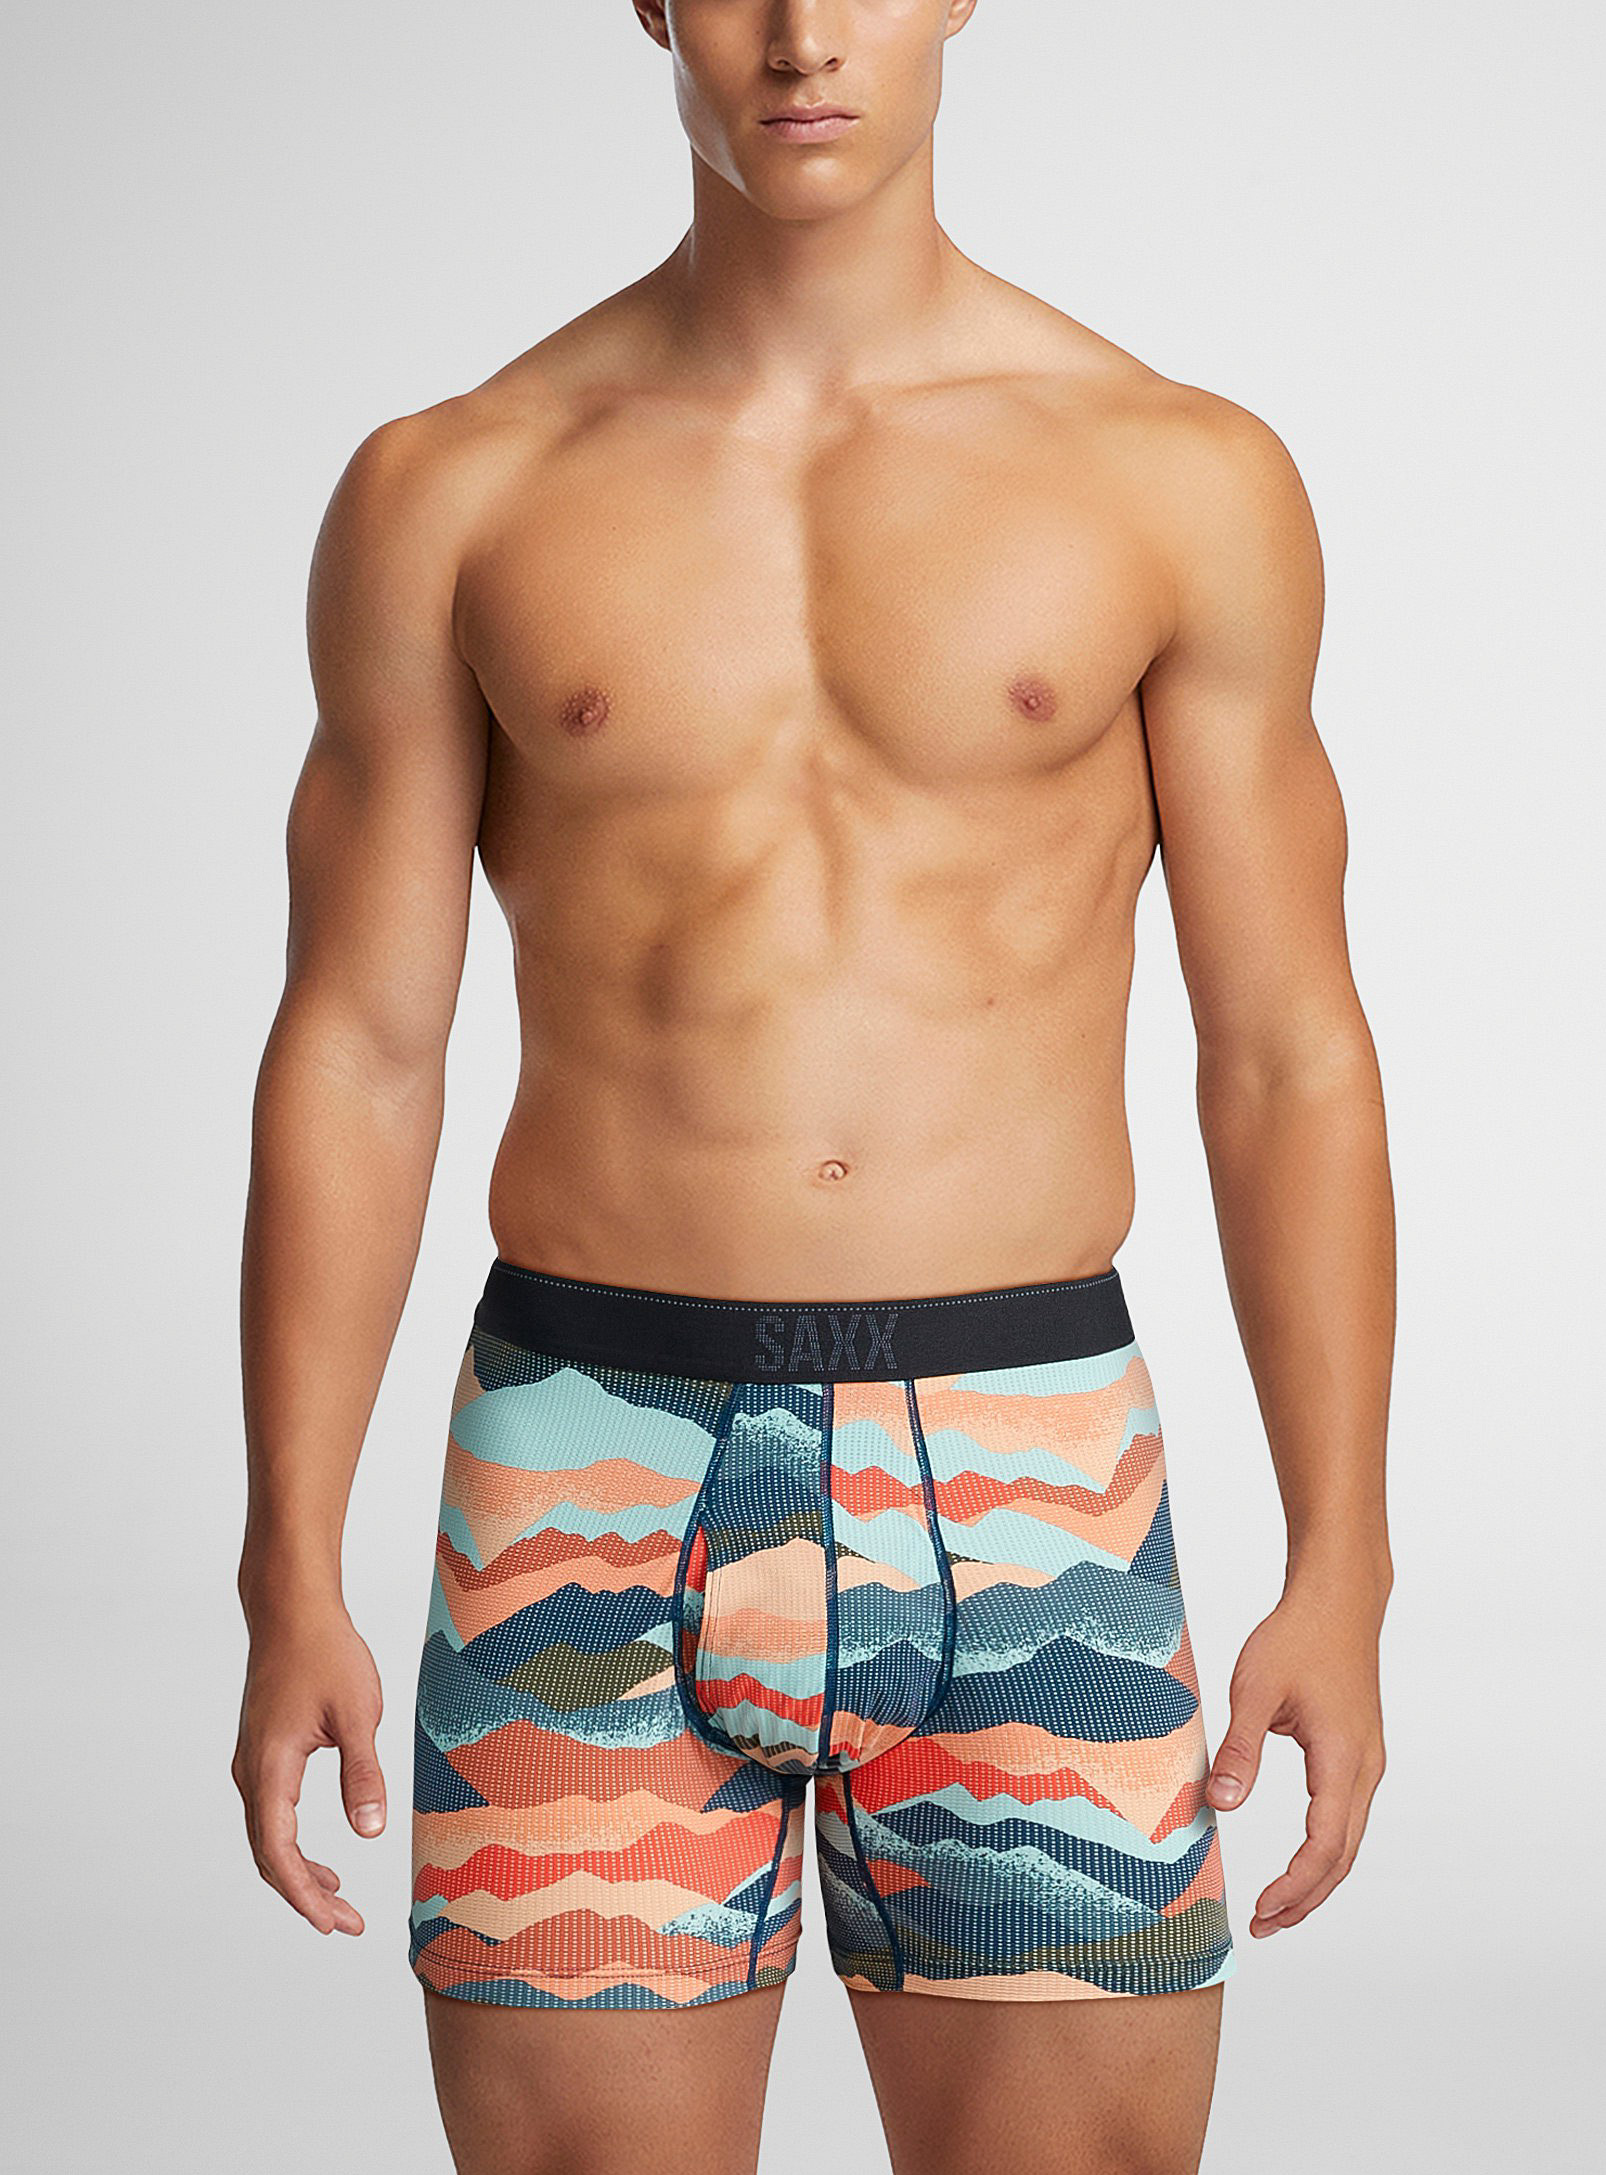 Saxx Mountain Abstract Micro Dotwork Boxer Brief Quest In Patterned Black